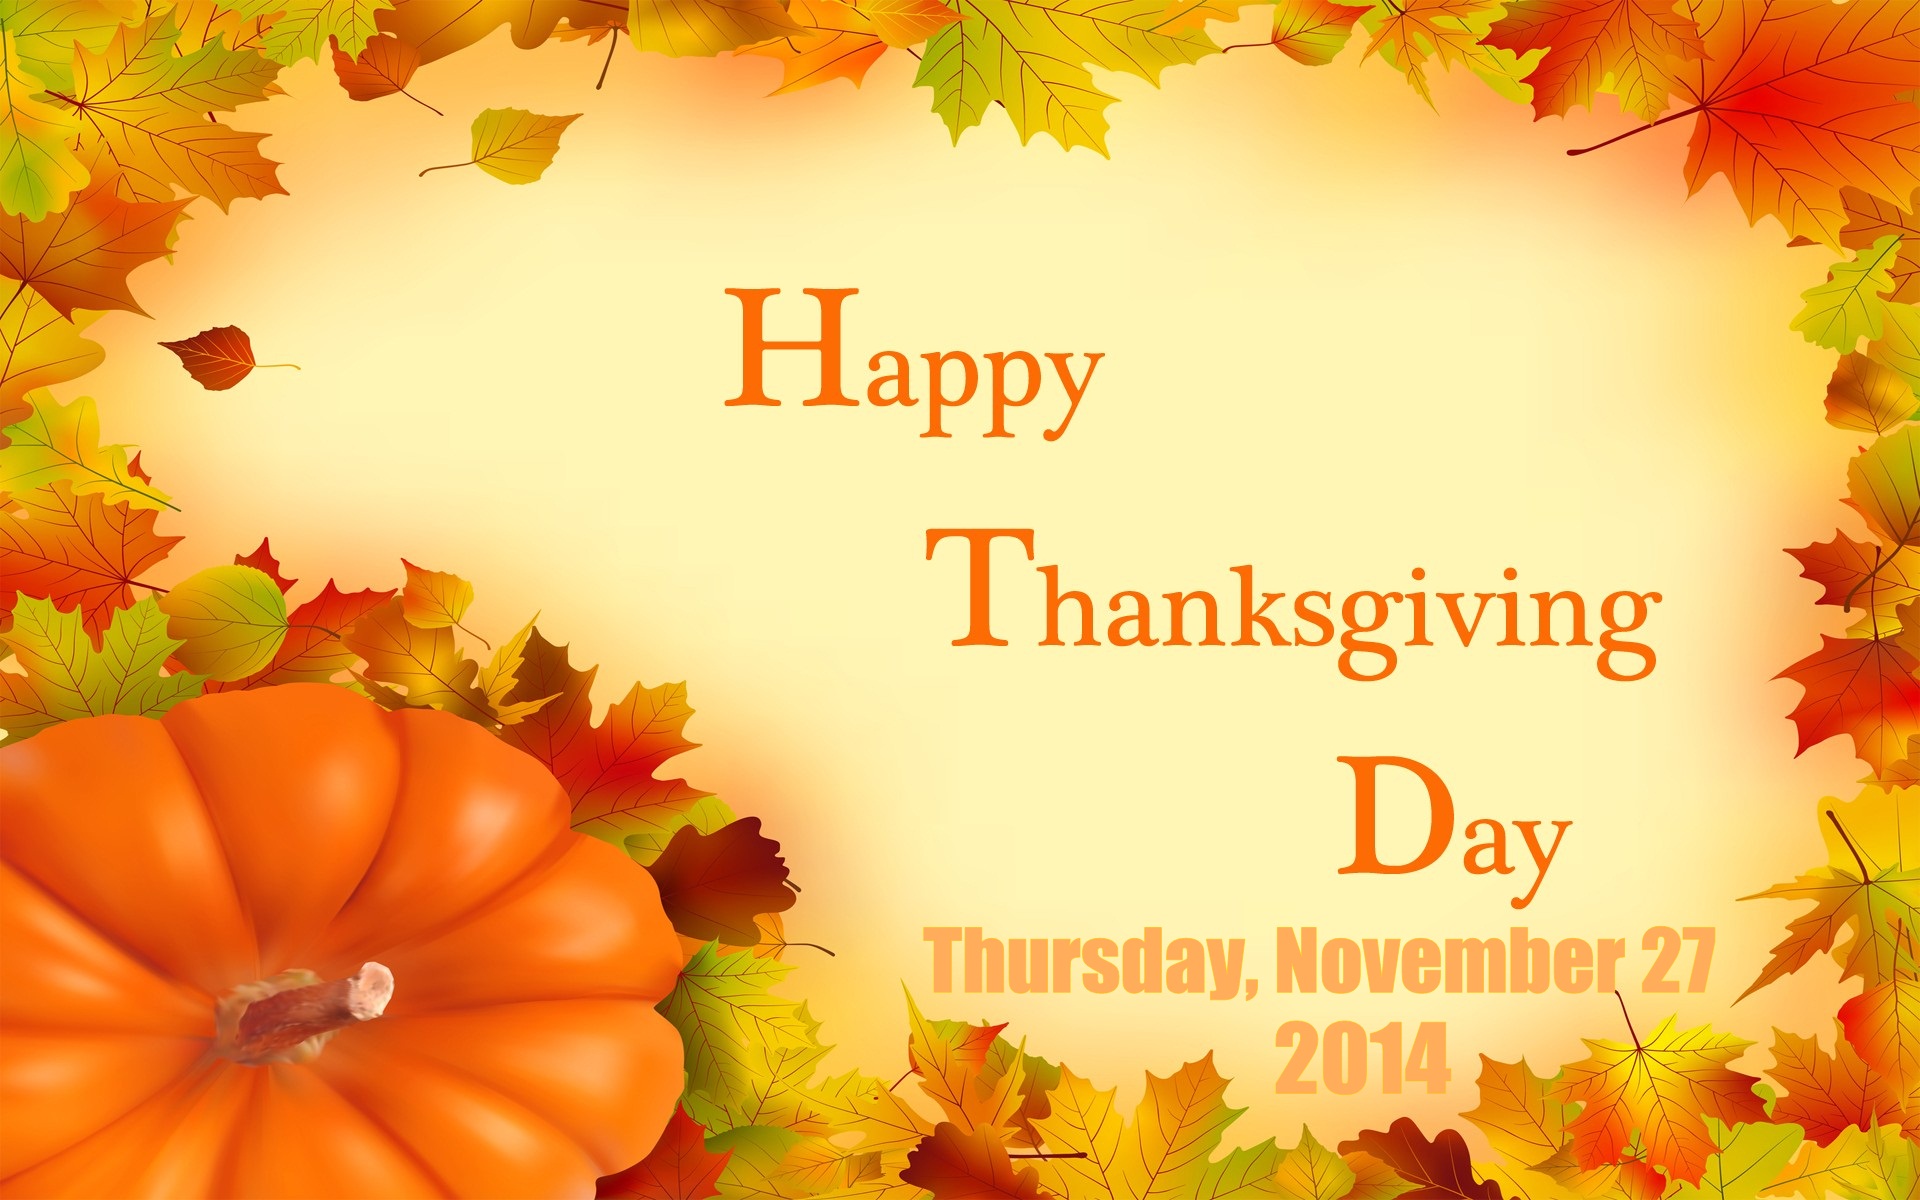 Wallpaper Of Happy Thanksgiving In Fhdq - Family Happy Thanksgiving Day - HD Wallpaper 